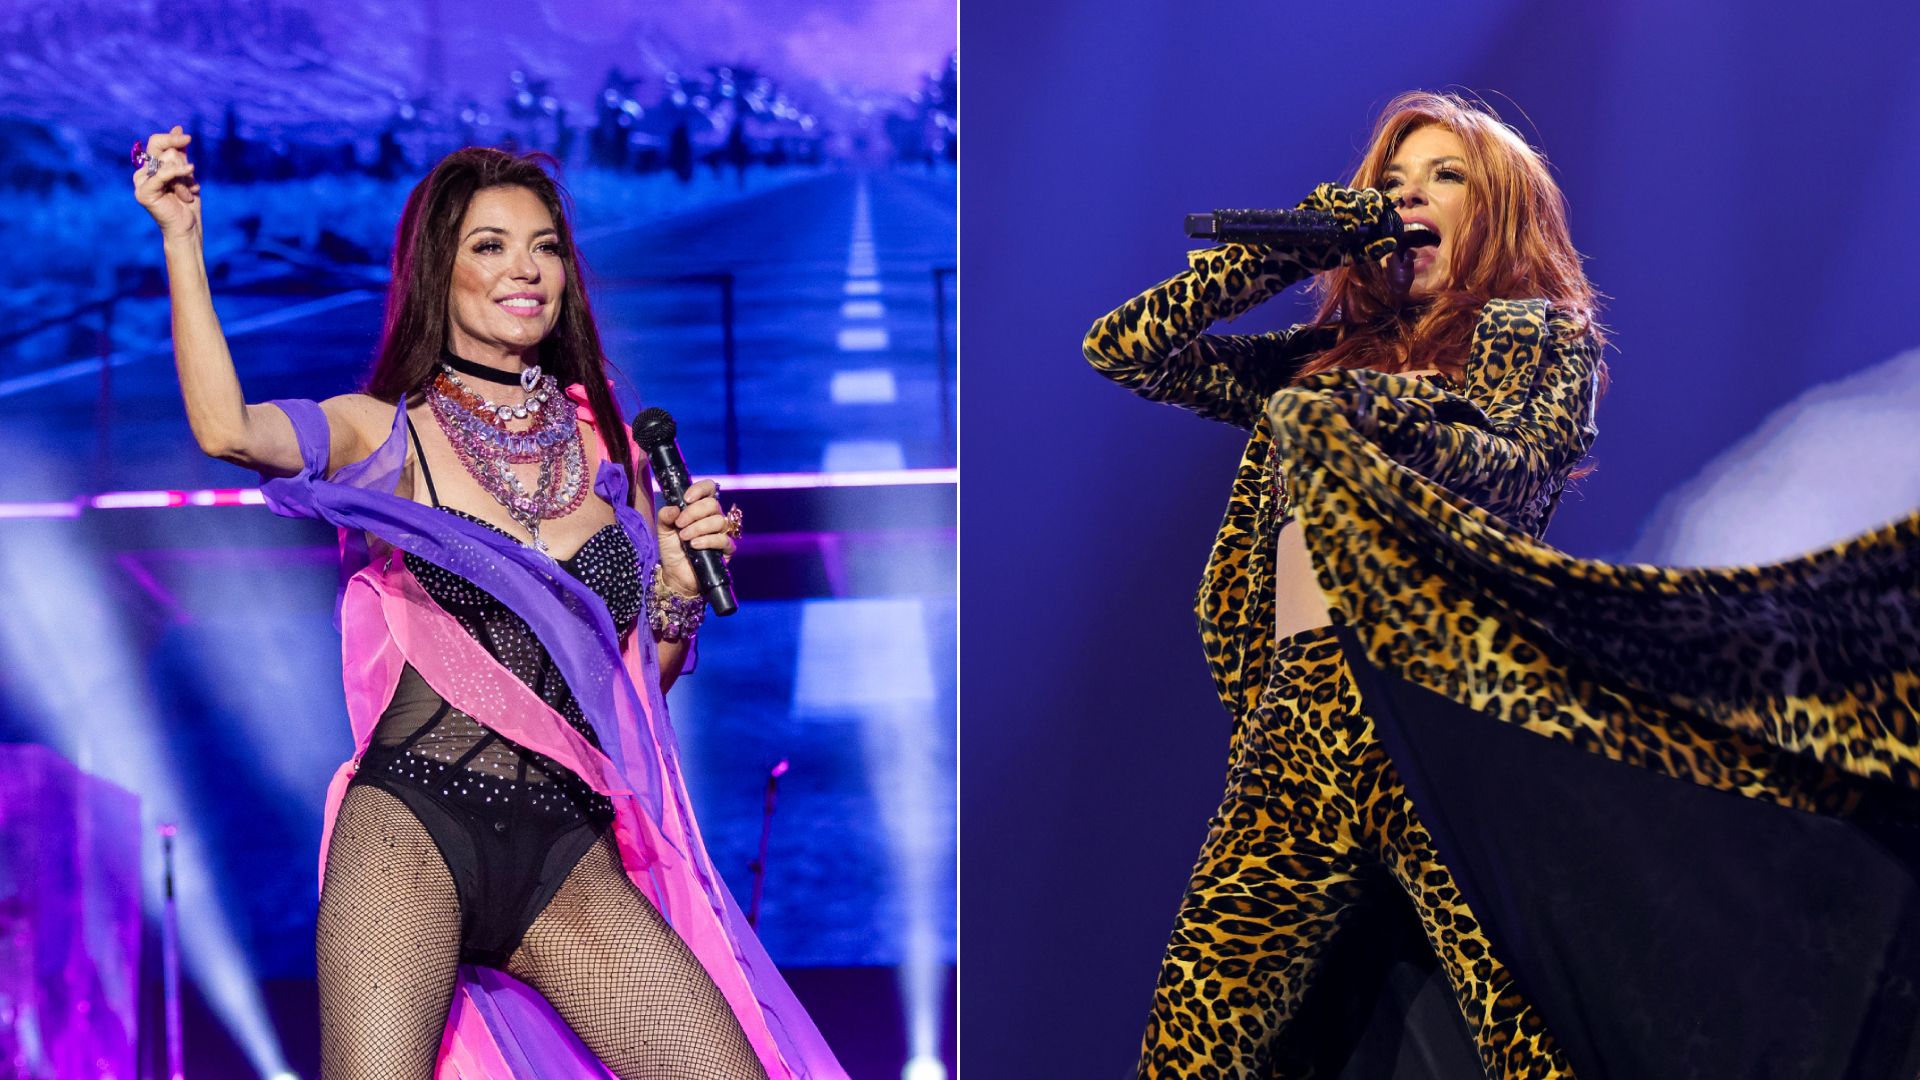 Shania Twain's wildest tour looks in photos From abbaring leopard